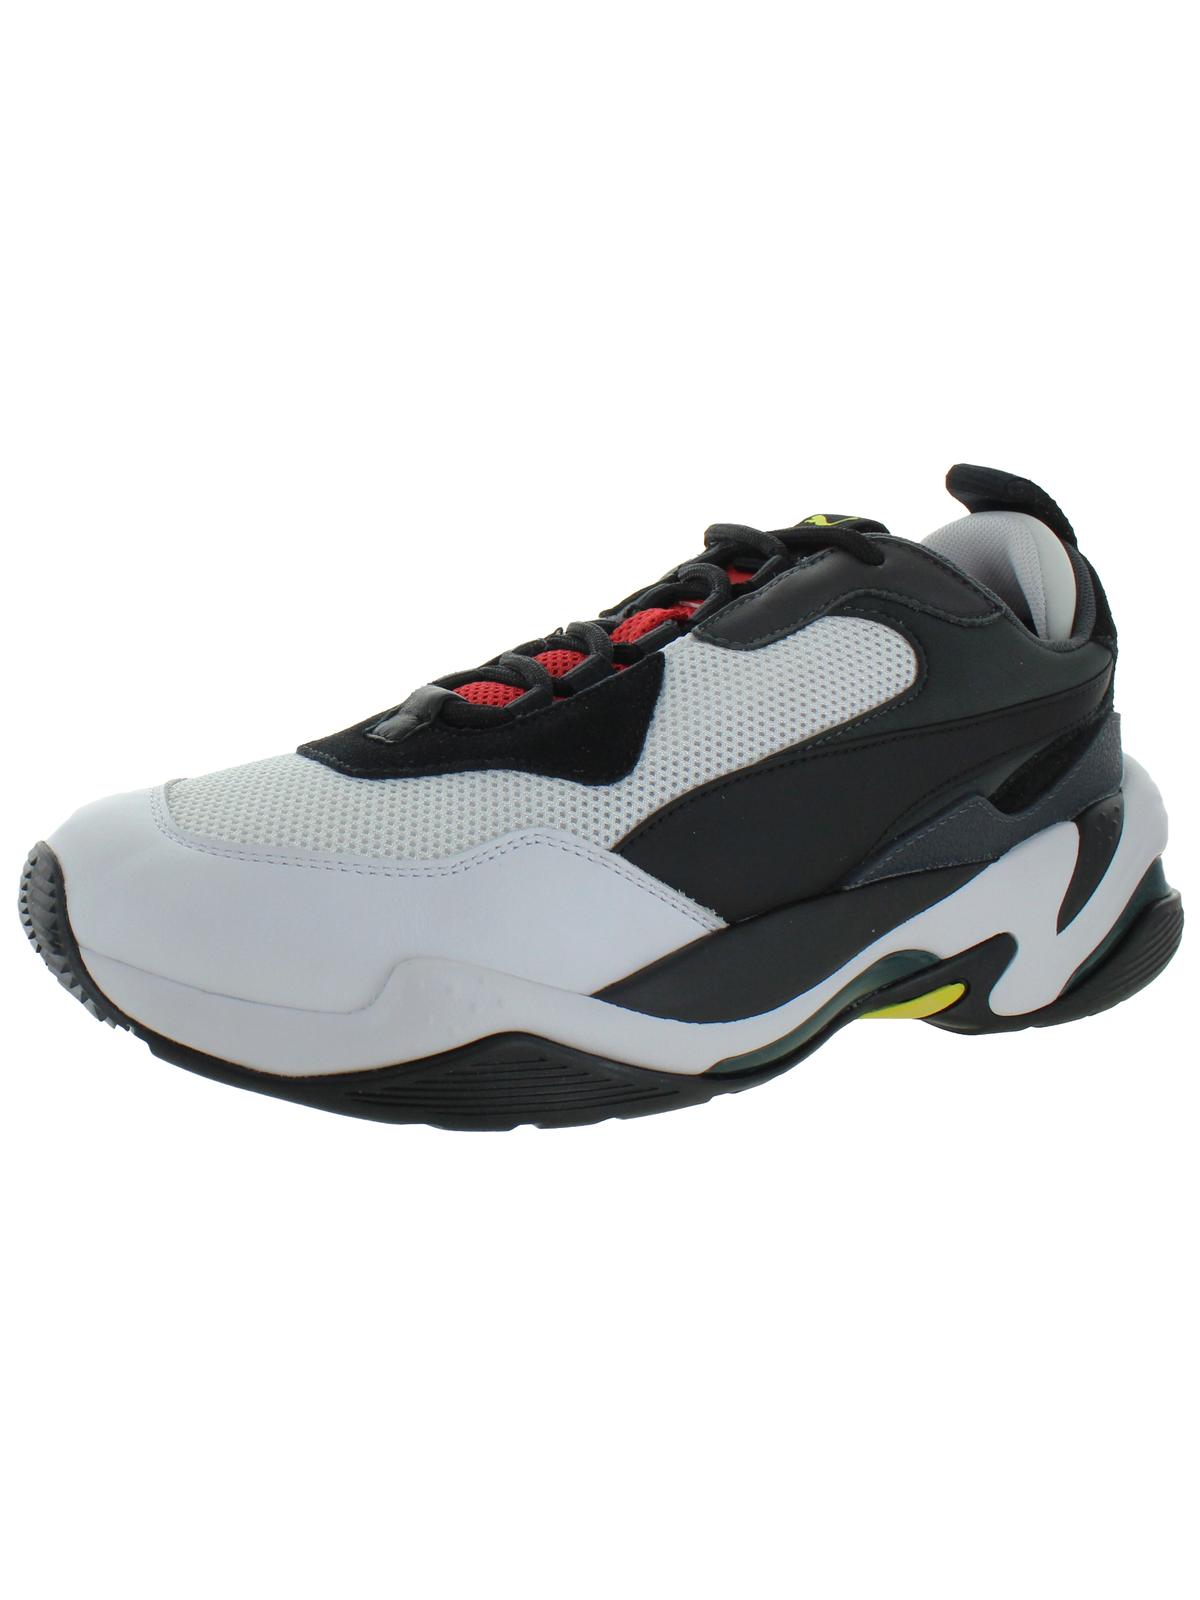 Puma Mens Thunder Spectra Leather Casual Running, Cross Training Shoes - image 1 of 3